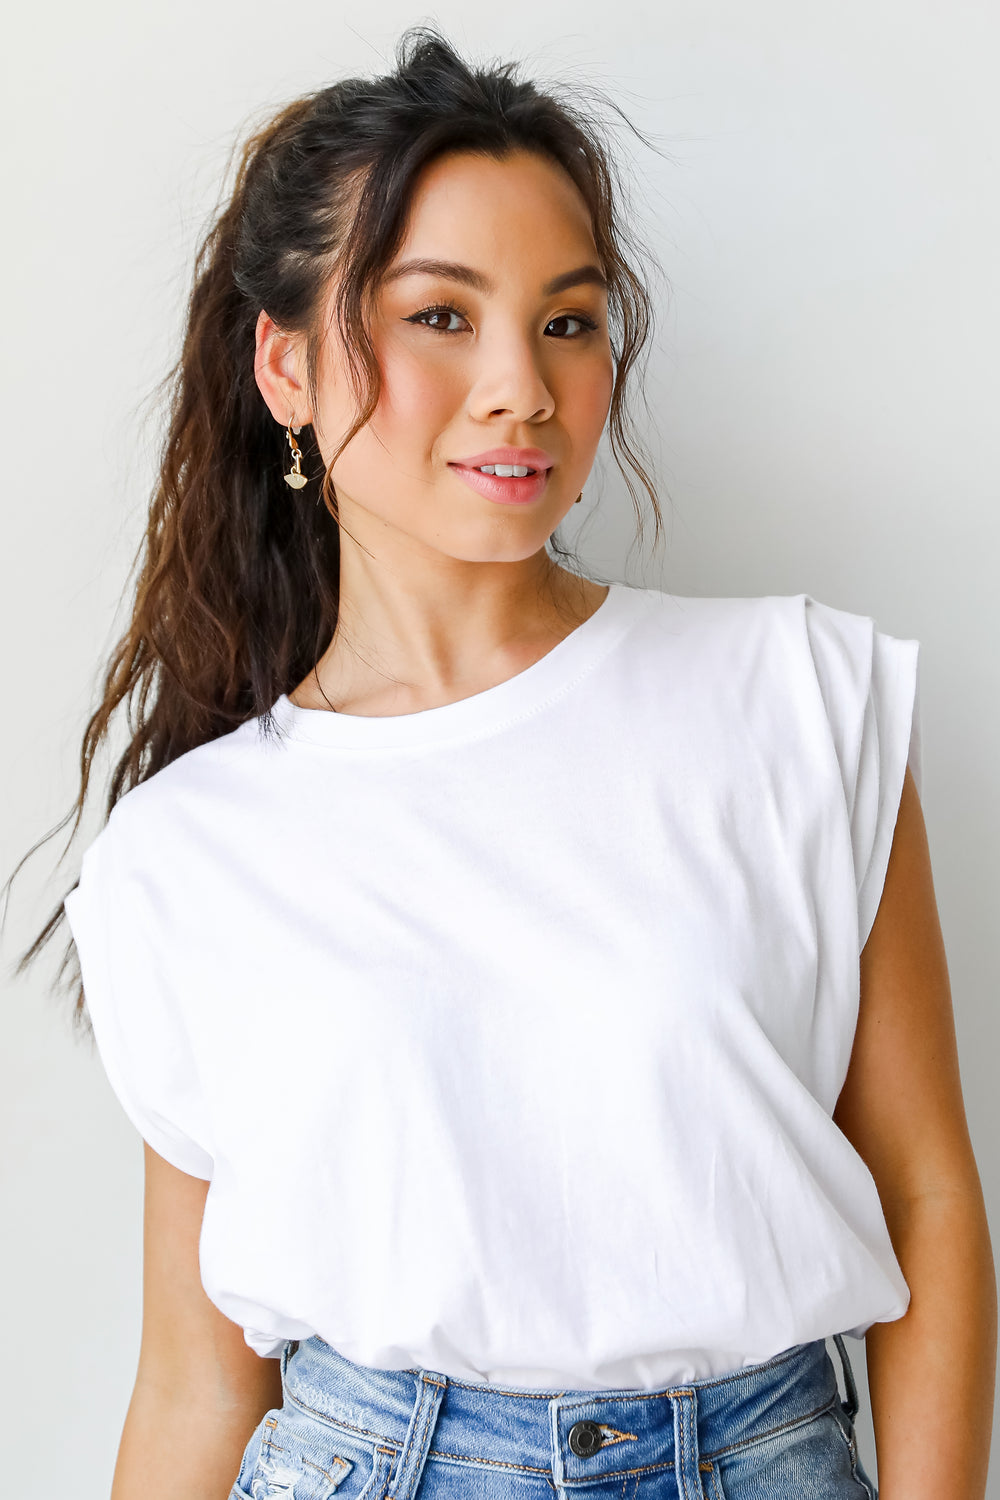 White Tee from dress up